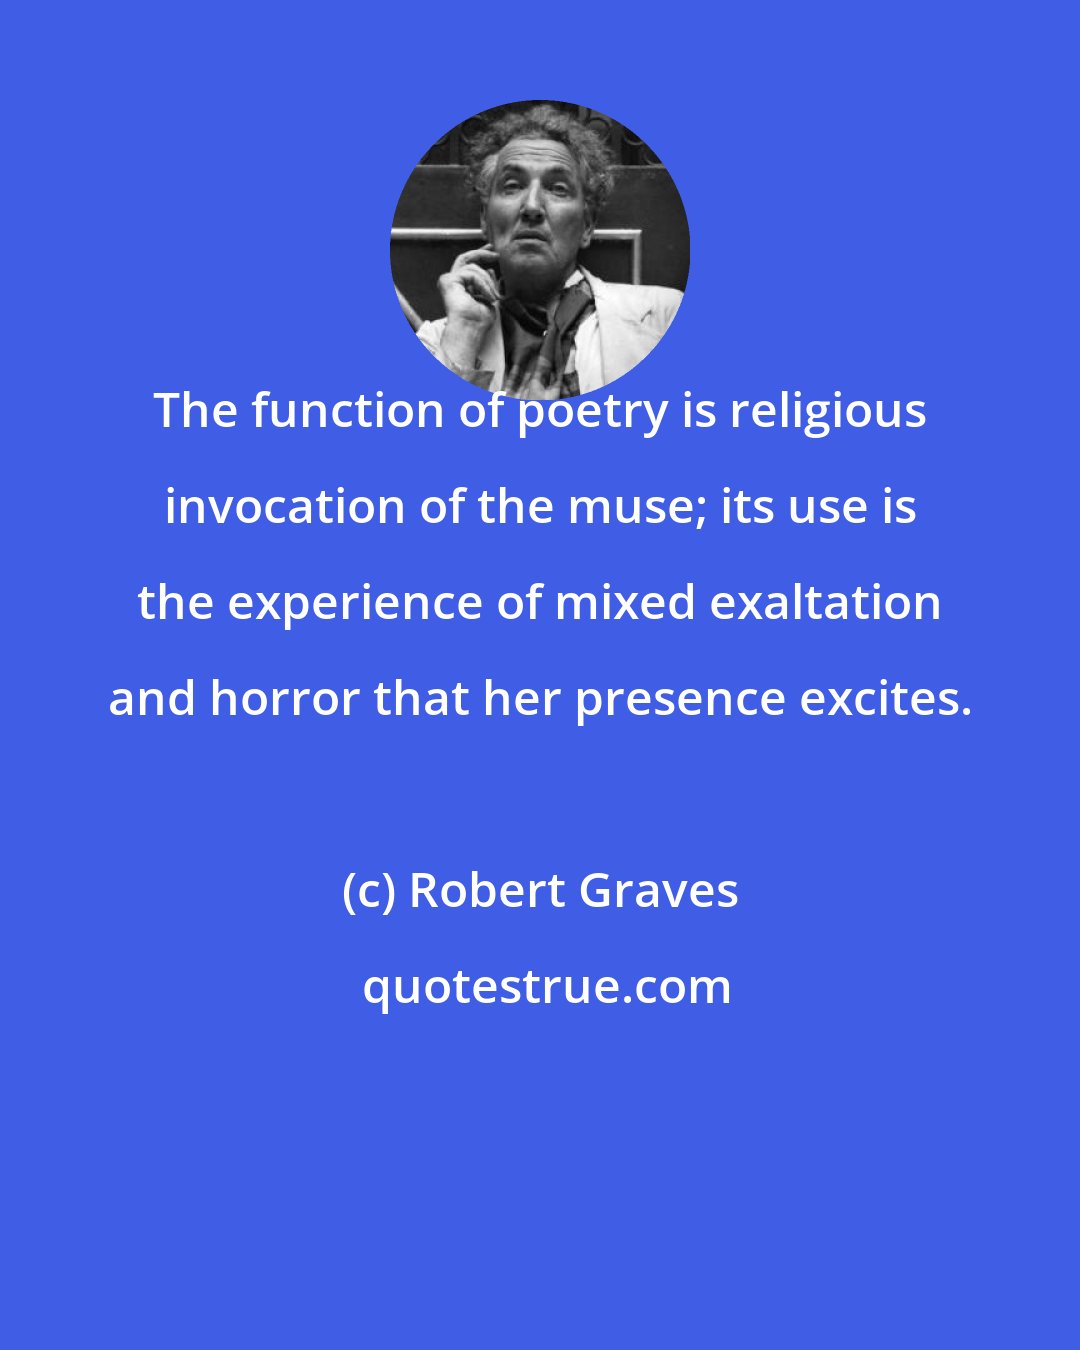 Robert Graves: The function of poetry is religious invocation of the muse; its use is the experience of mixed exaltation and horror that her presence excites.